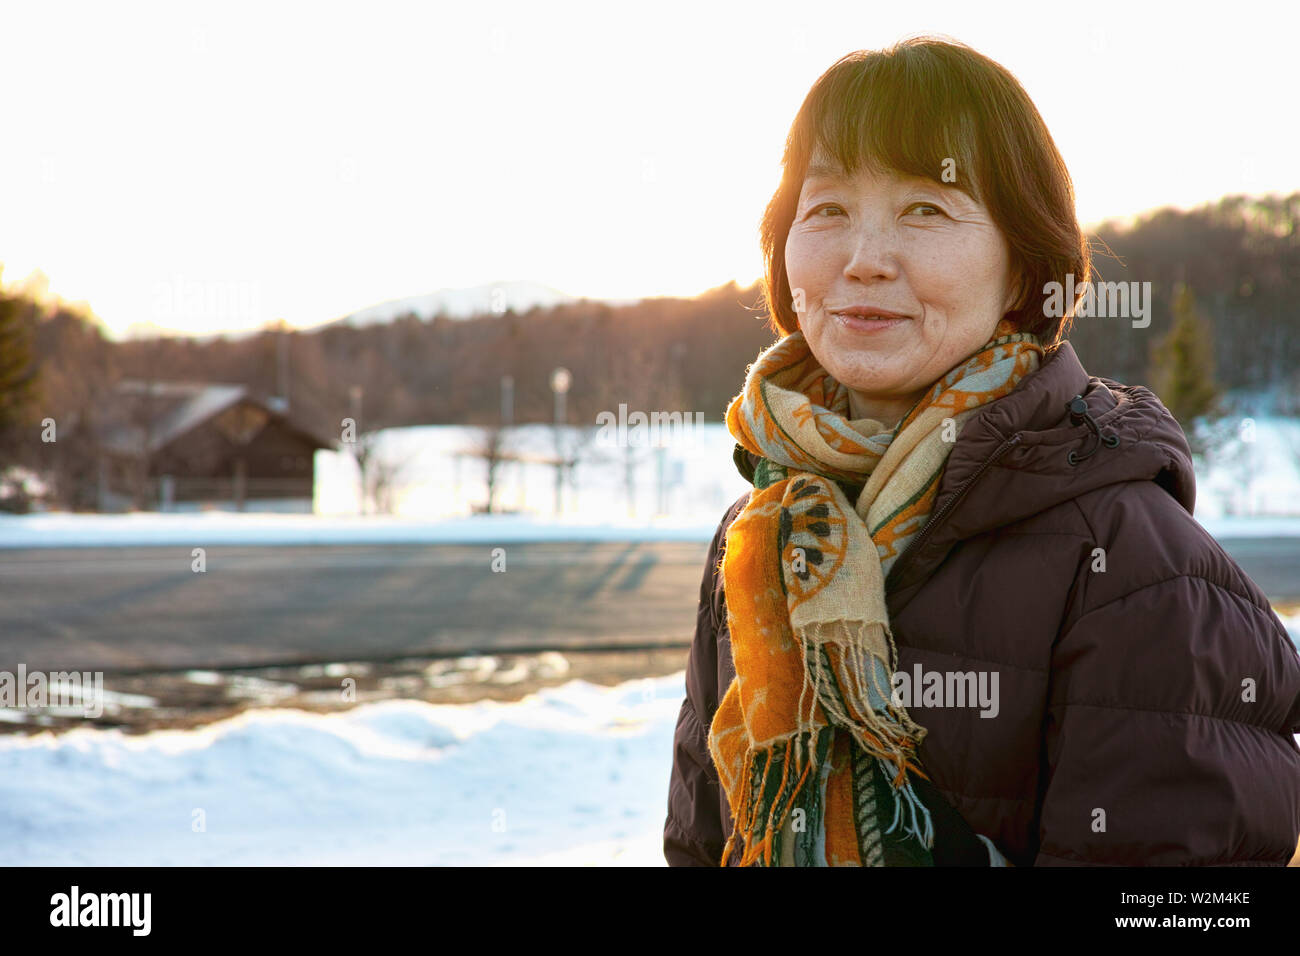 An older lady smiling while looking at the Winter scenery Stock Photo